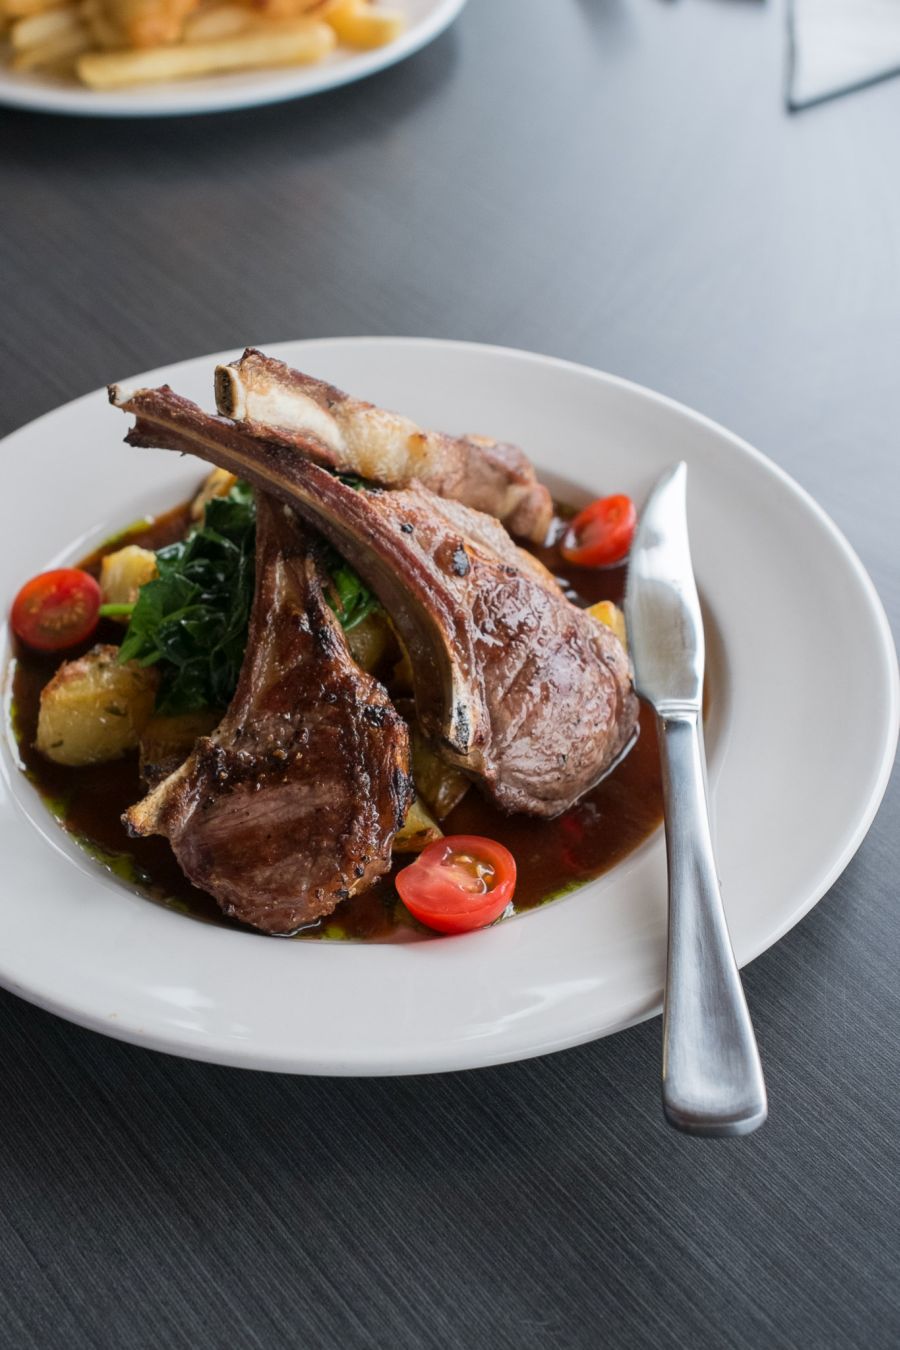 Lamb cutlets - with roast potatoes, wilted spinach and rosemary gravy (AU$31)